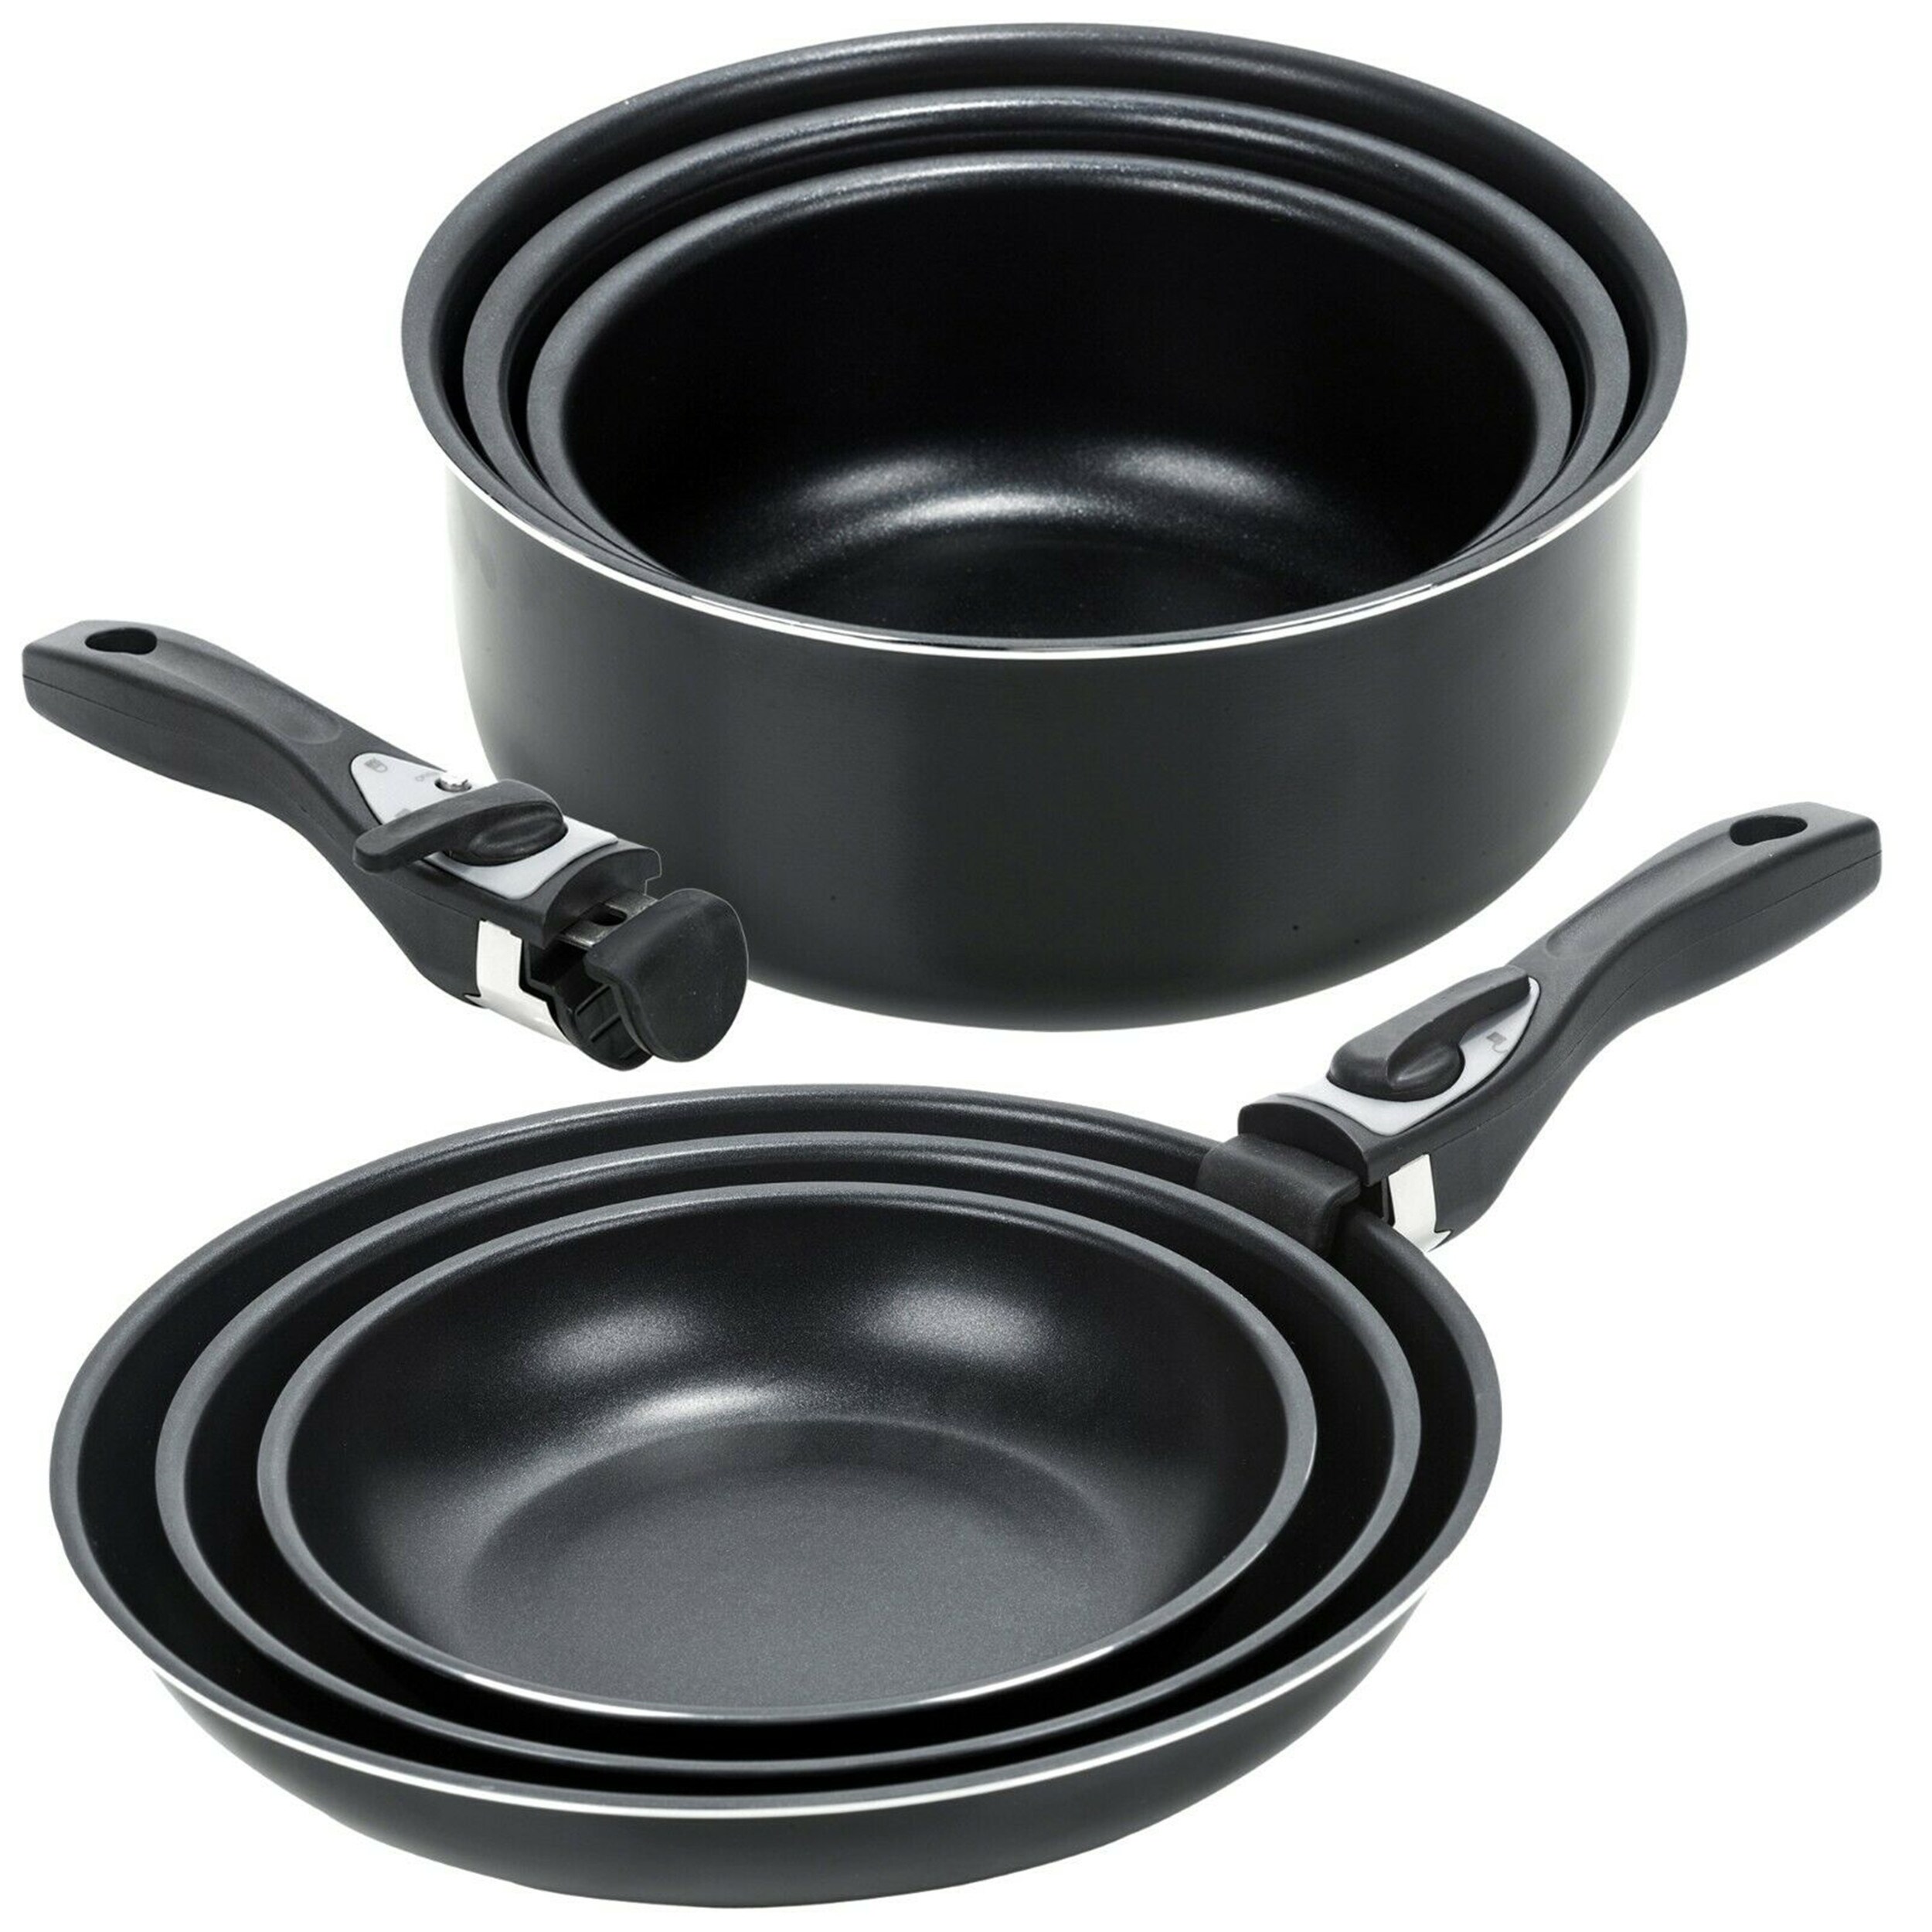 https://ak1.ostkcdn.com/images/products/is/images/direct/93e25285a9821fa34278de8ffc7bb54fff1a7859/9-Piece-Ceramic-Cookware-Pans-Pots-Set-with-Detachable-Handle-and-Lid-Induction.jpg